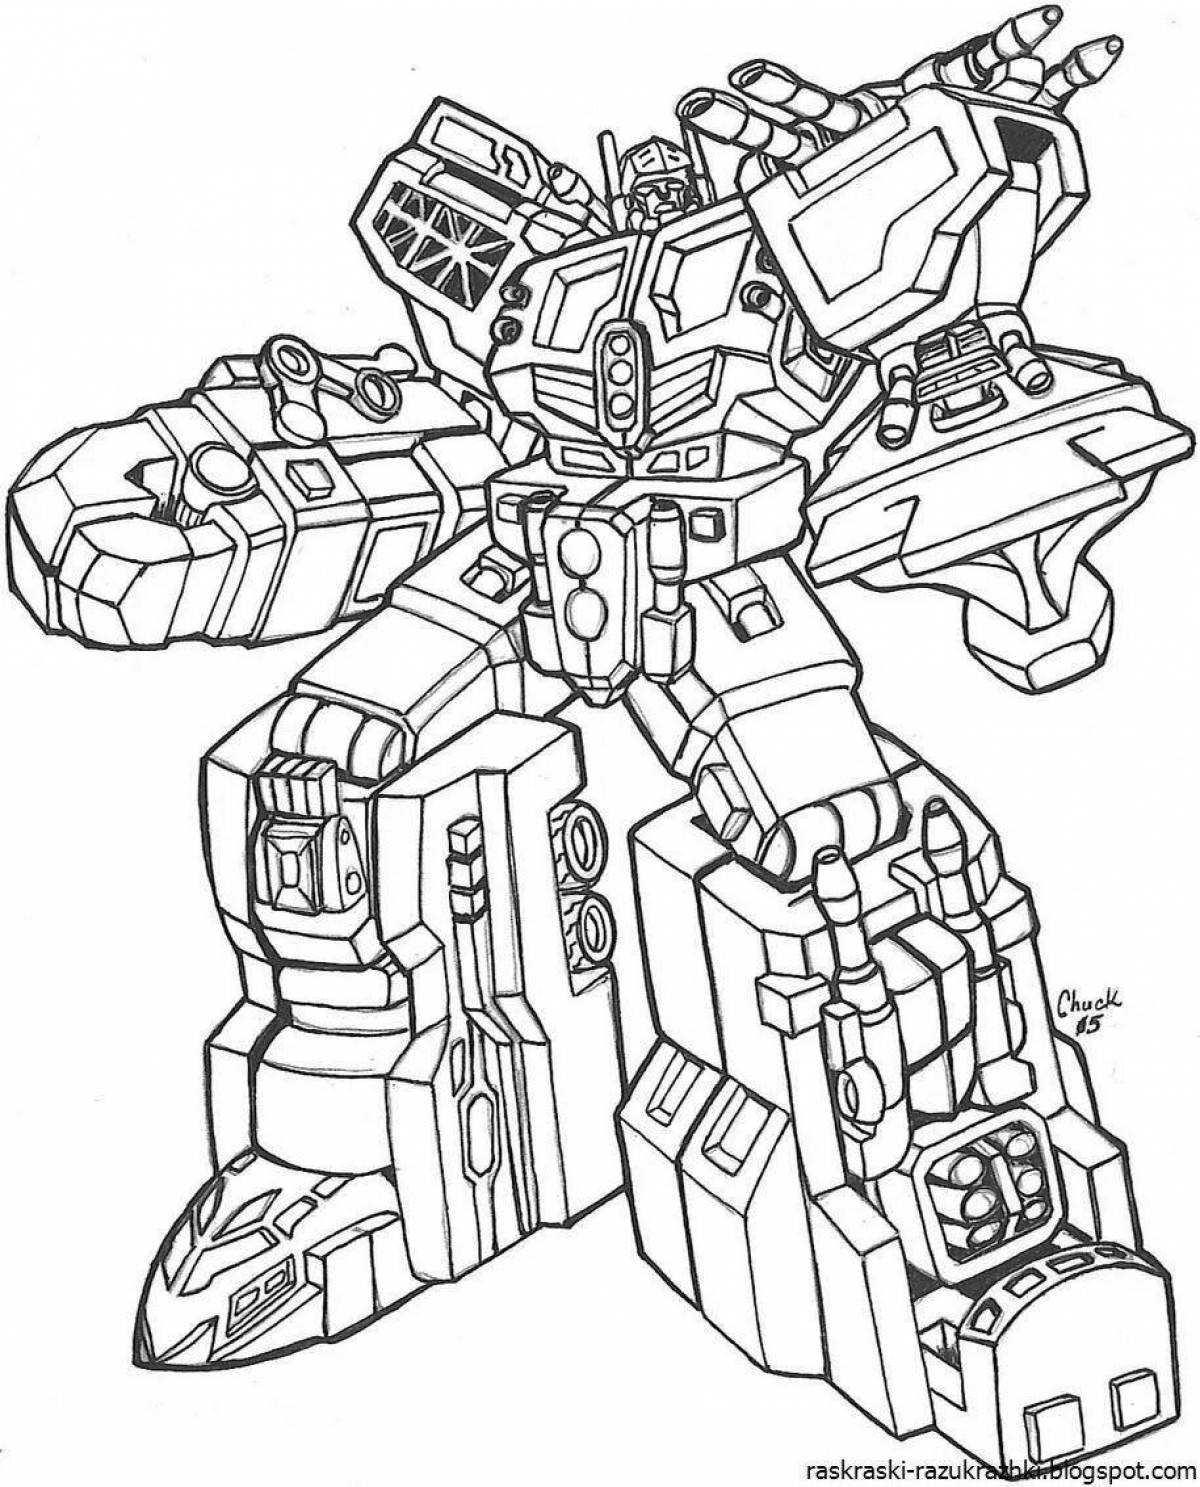 Children's transforming robot coloring book for kids